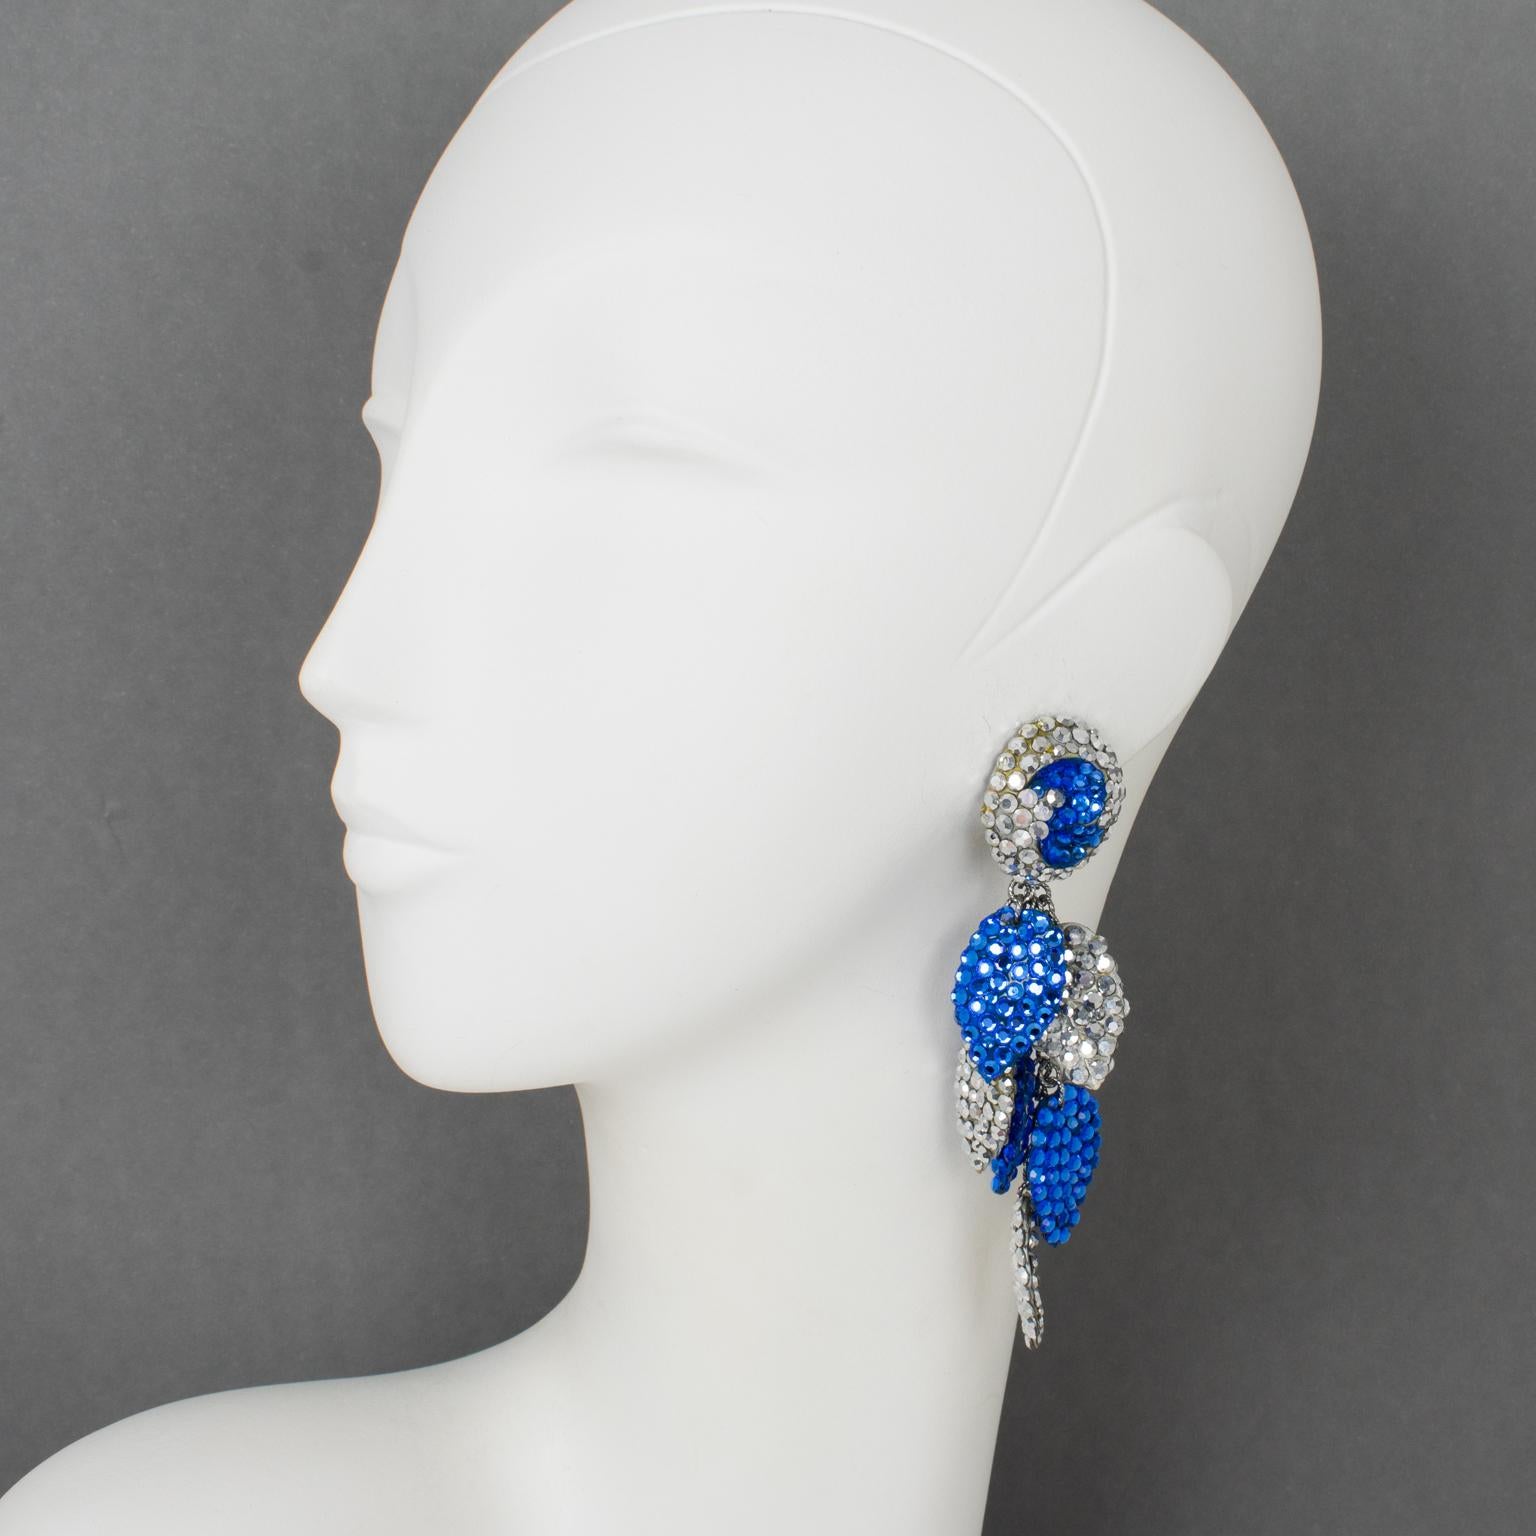 Richard Kerr designed these stylish cascading clip-on earrings in the 1980s. They are made of his signature pave rhinestones. They feature an extra-long dangling shape with multi-chain and leaves-shaped elements attached to them, all covered with